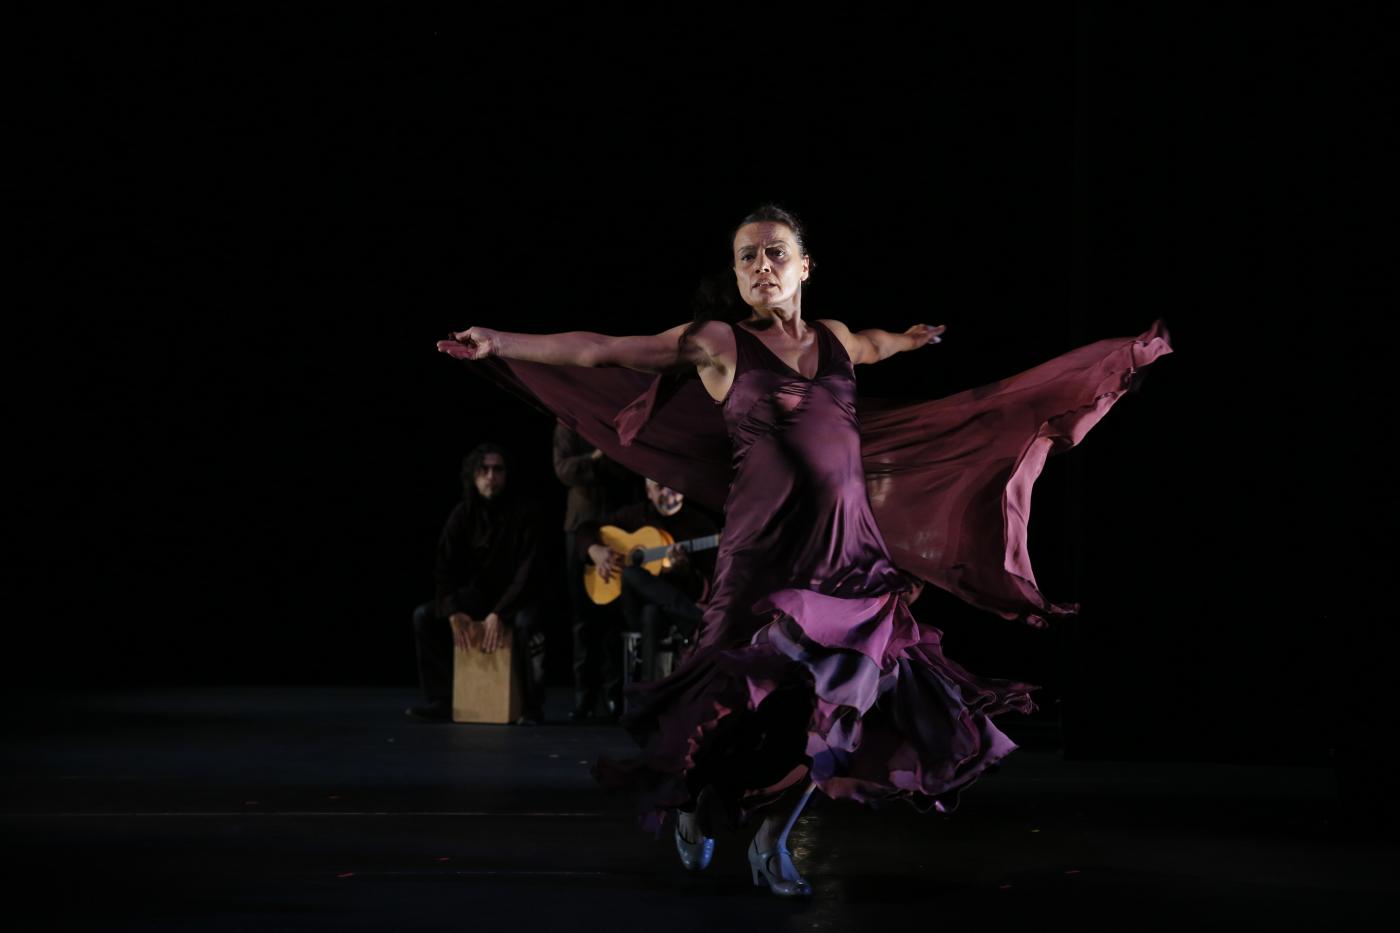 On a stage, a flamenco dancer twirls with her arms wide and her purple dress blowing in motion.